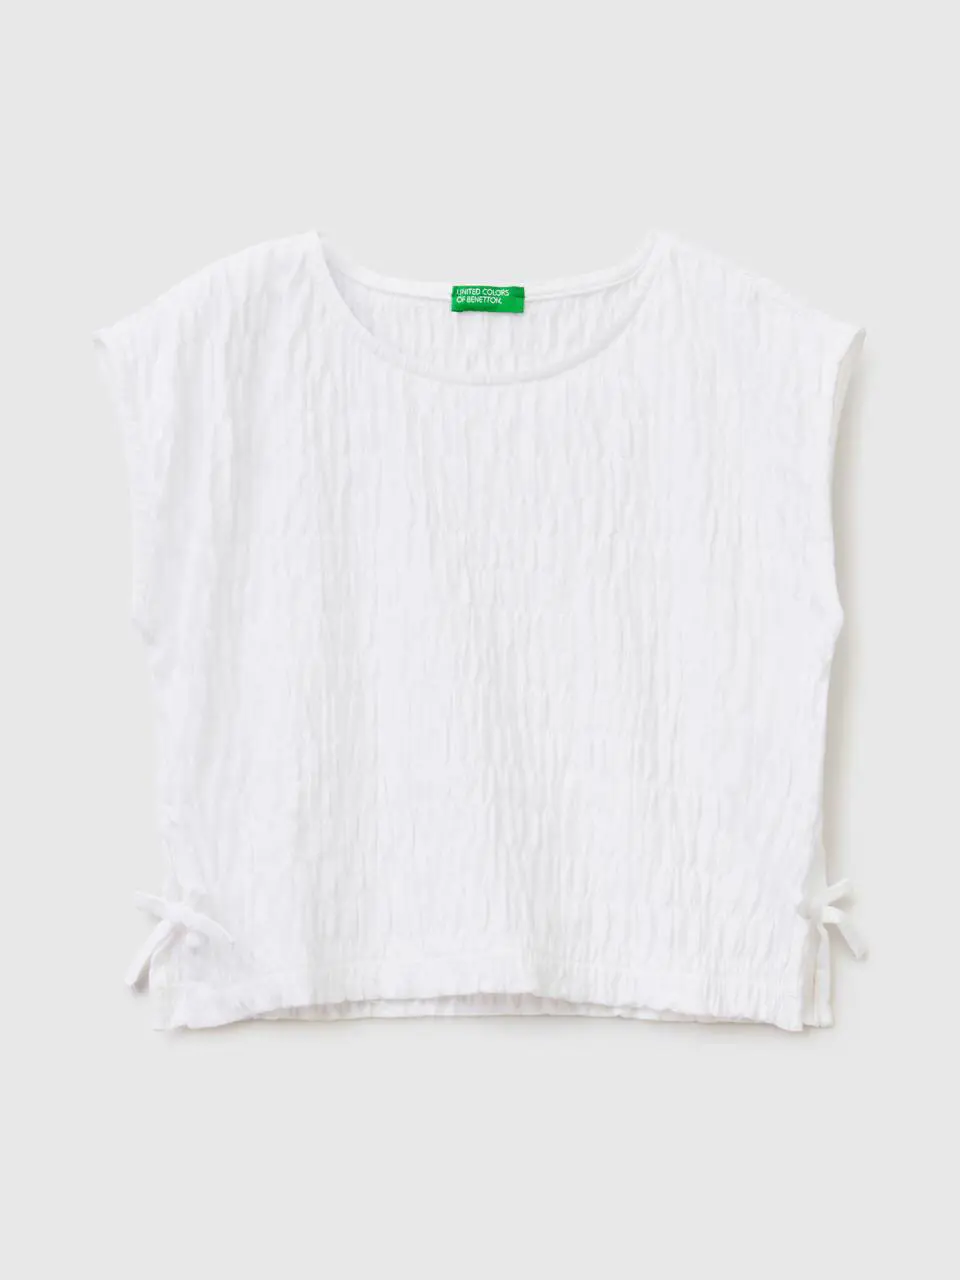 Benetton gathered shirt with bows. 1